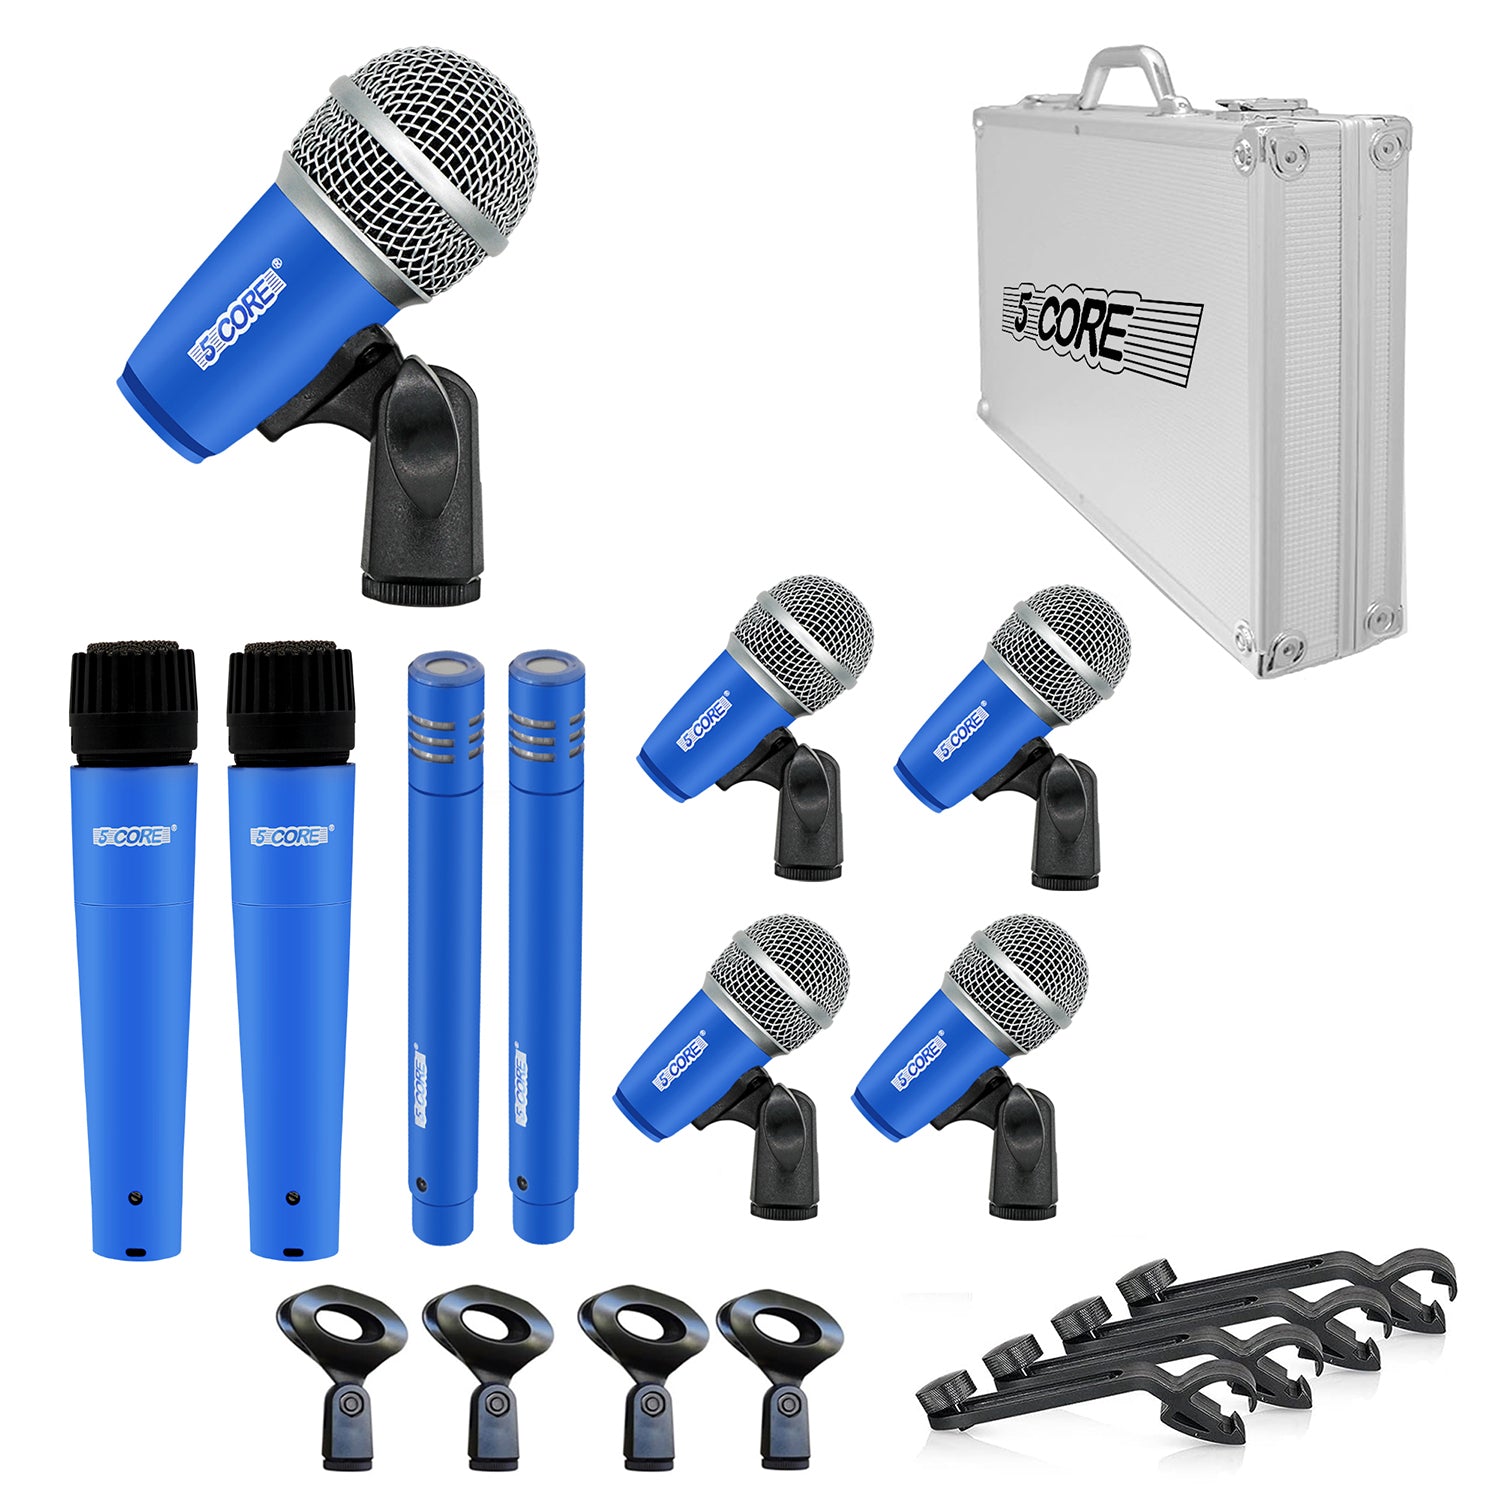 5 Core Drum Mic Kit 9 Piece Drumset Wired Dynamic Microphone Kick Bass, Tom/Snare & Cymbals Set